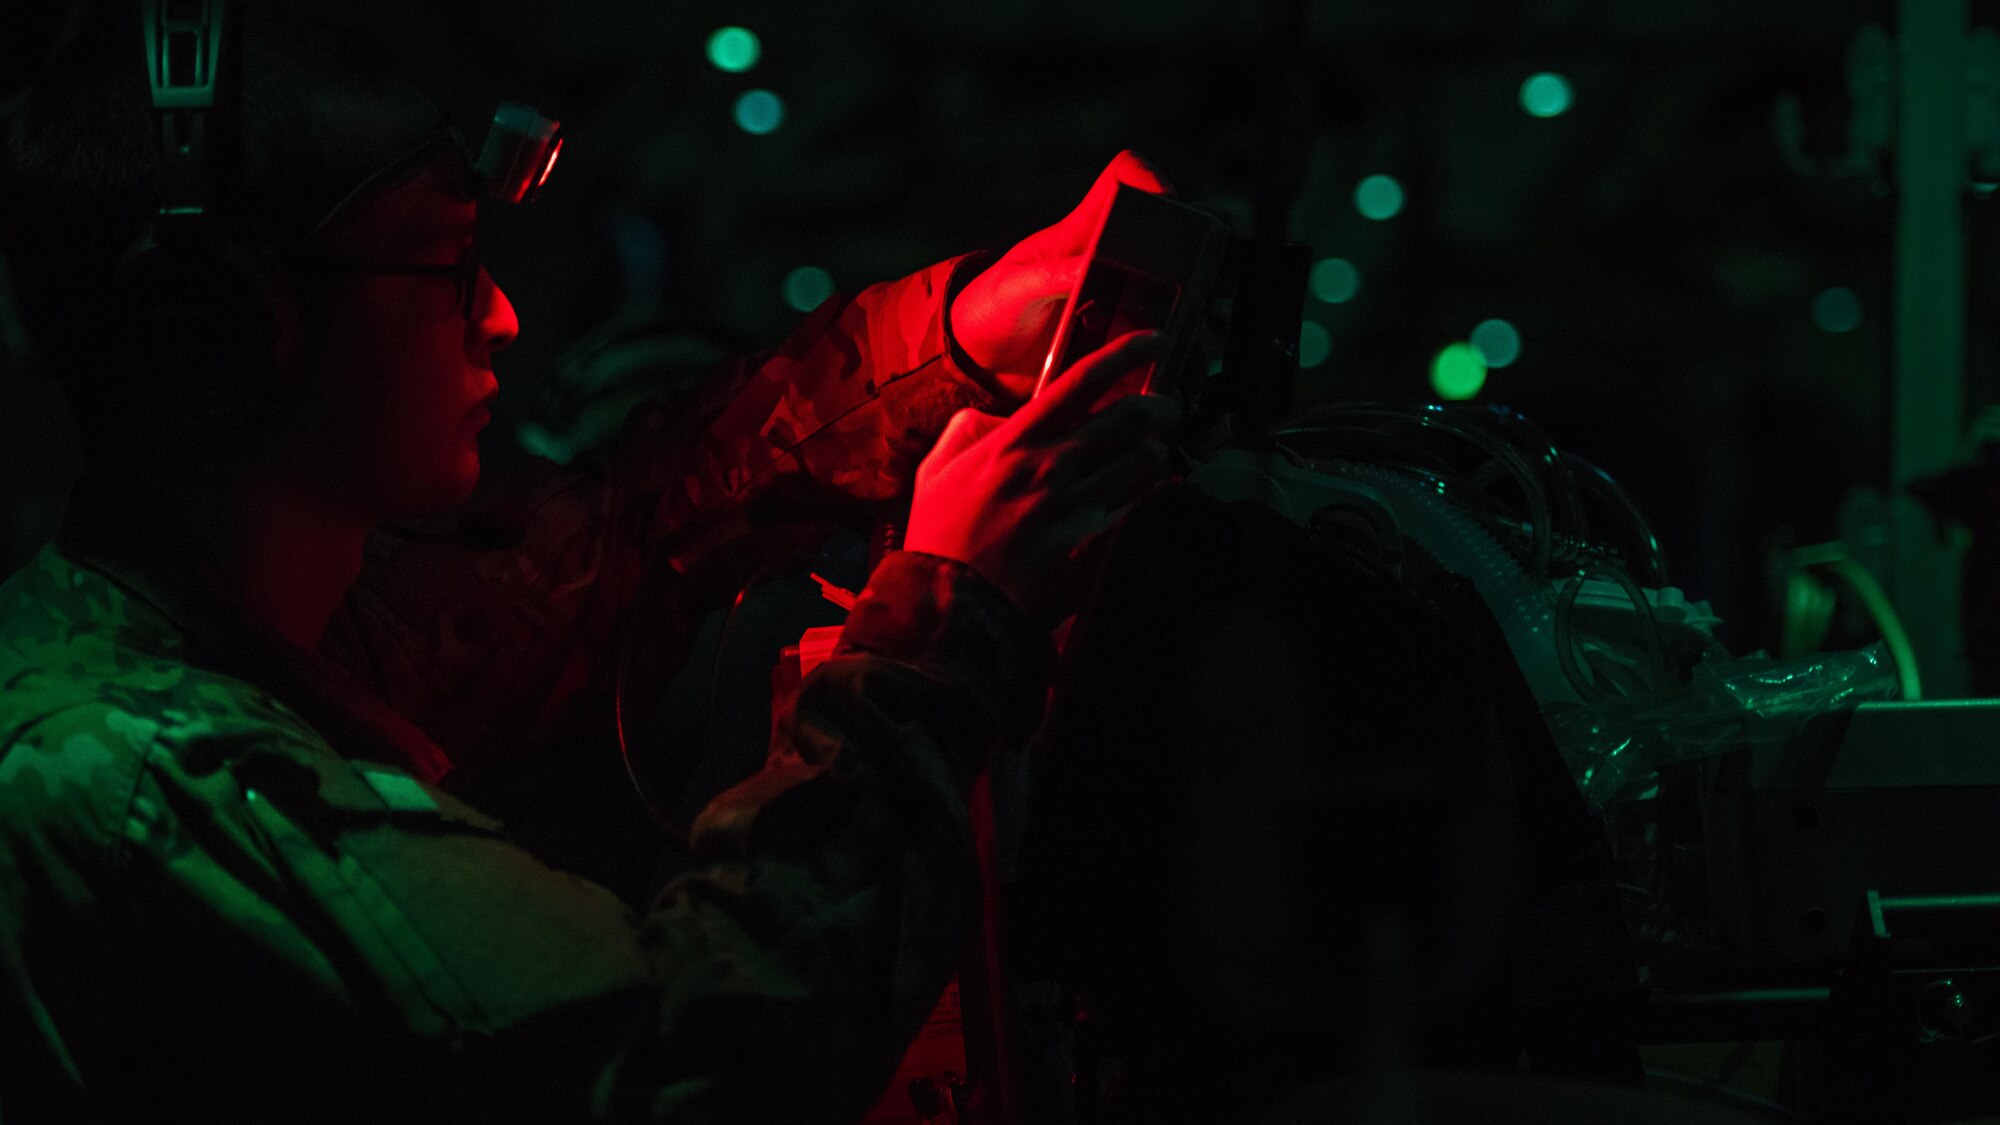 Capt. Shawn Lawson, 455th Expeditionary Aeromedical Evacuation Squadron Critical Care Air Transport Team nurse, adjusts a respirator aboard a C-130J Hercules while transporting a patient from Kandahar Airfield to Bagram Airfield, Afghanistan, Feb. 22, 2017. The patient was an Afghan National Army soldier who suffered injuries during a battle. The CCATT brought him to the Craig Joint Theater Hospital at Bagram Airfield, Afghanistan to receive treatment. (U.S. Air Force photo by Staff Sgt. Katherine Spessa)